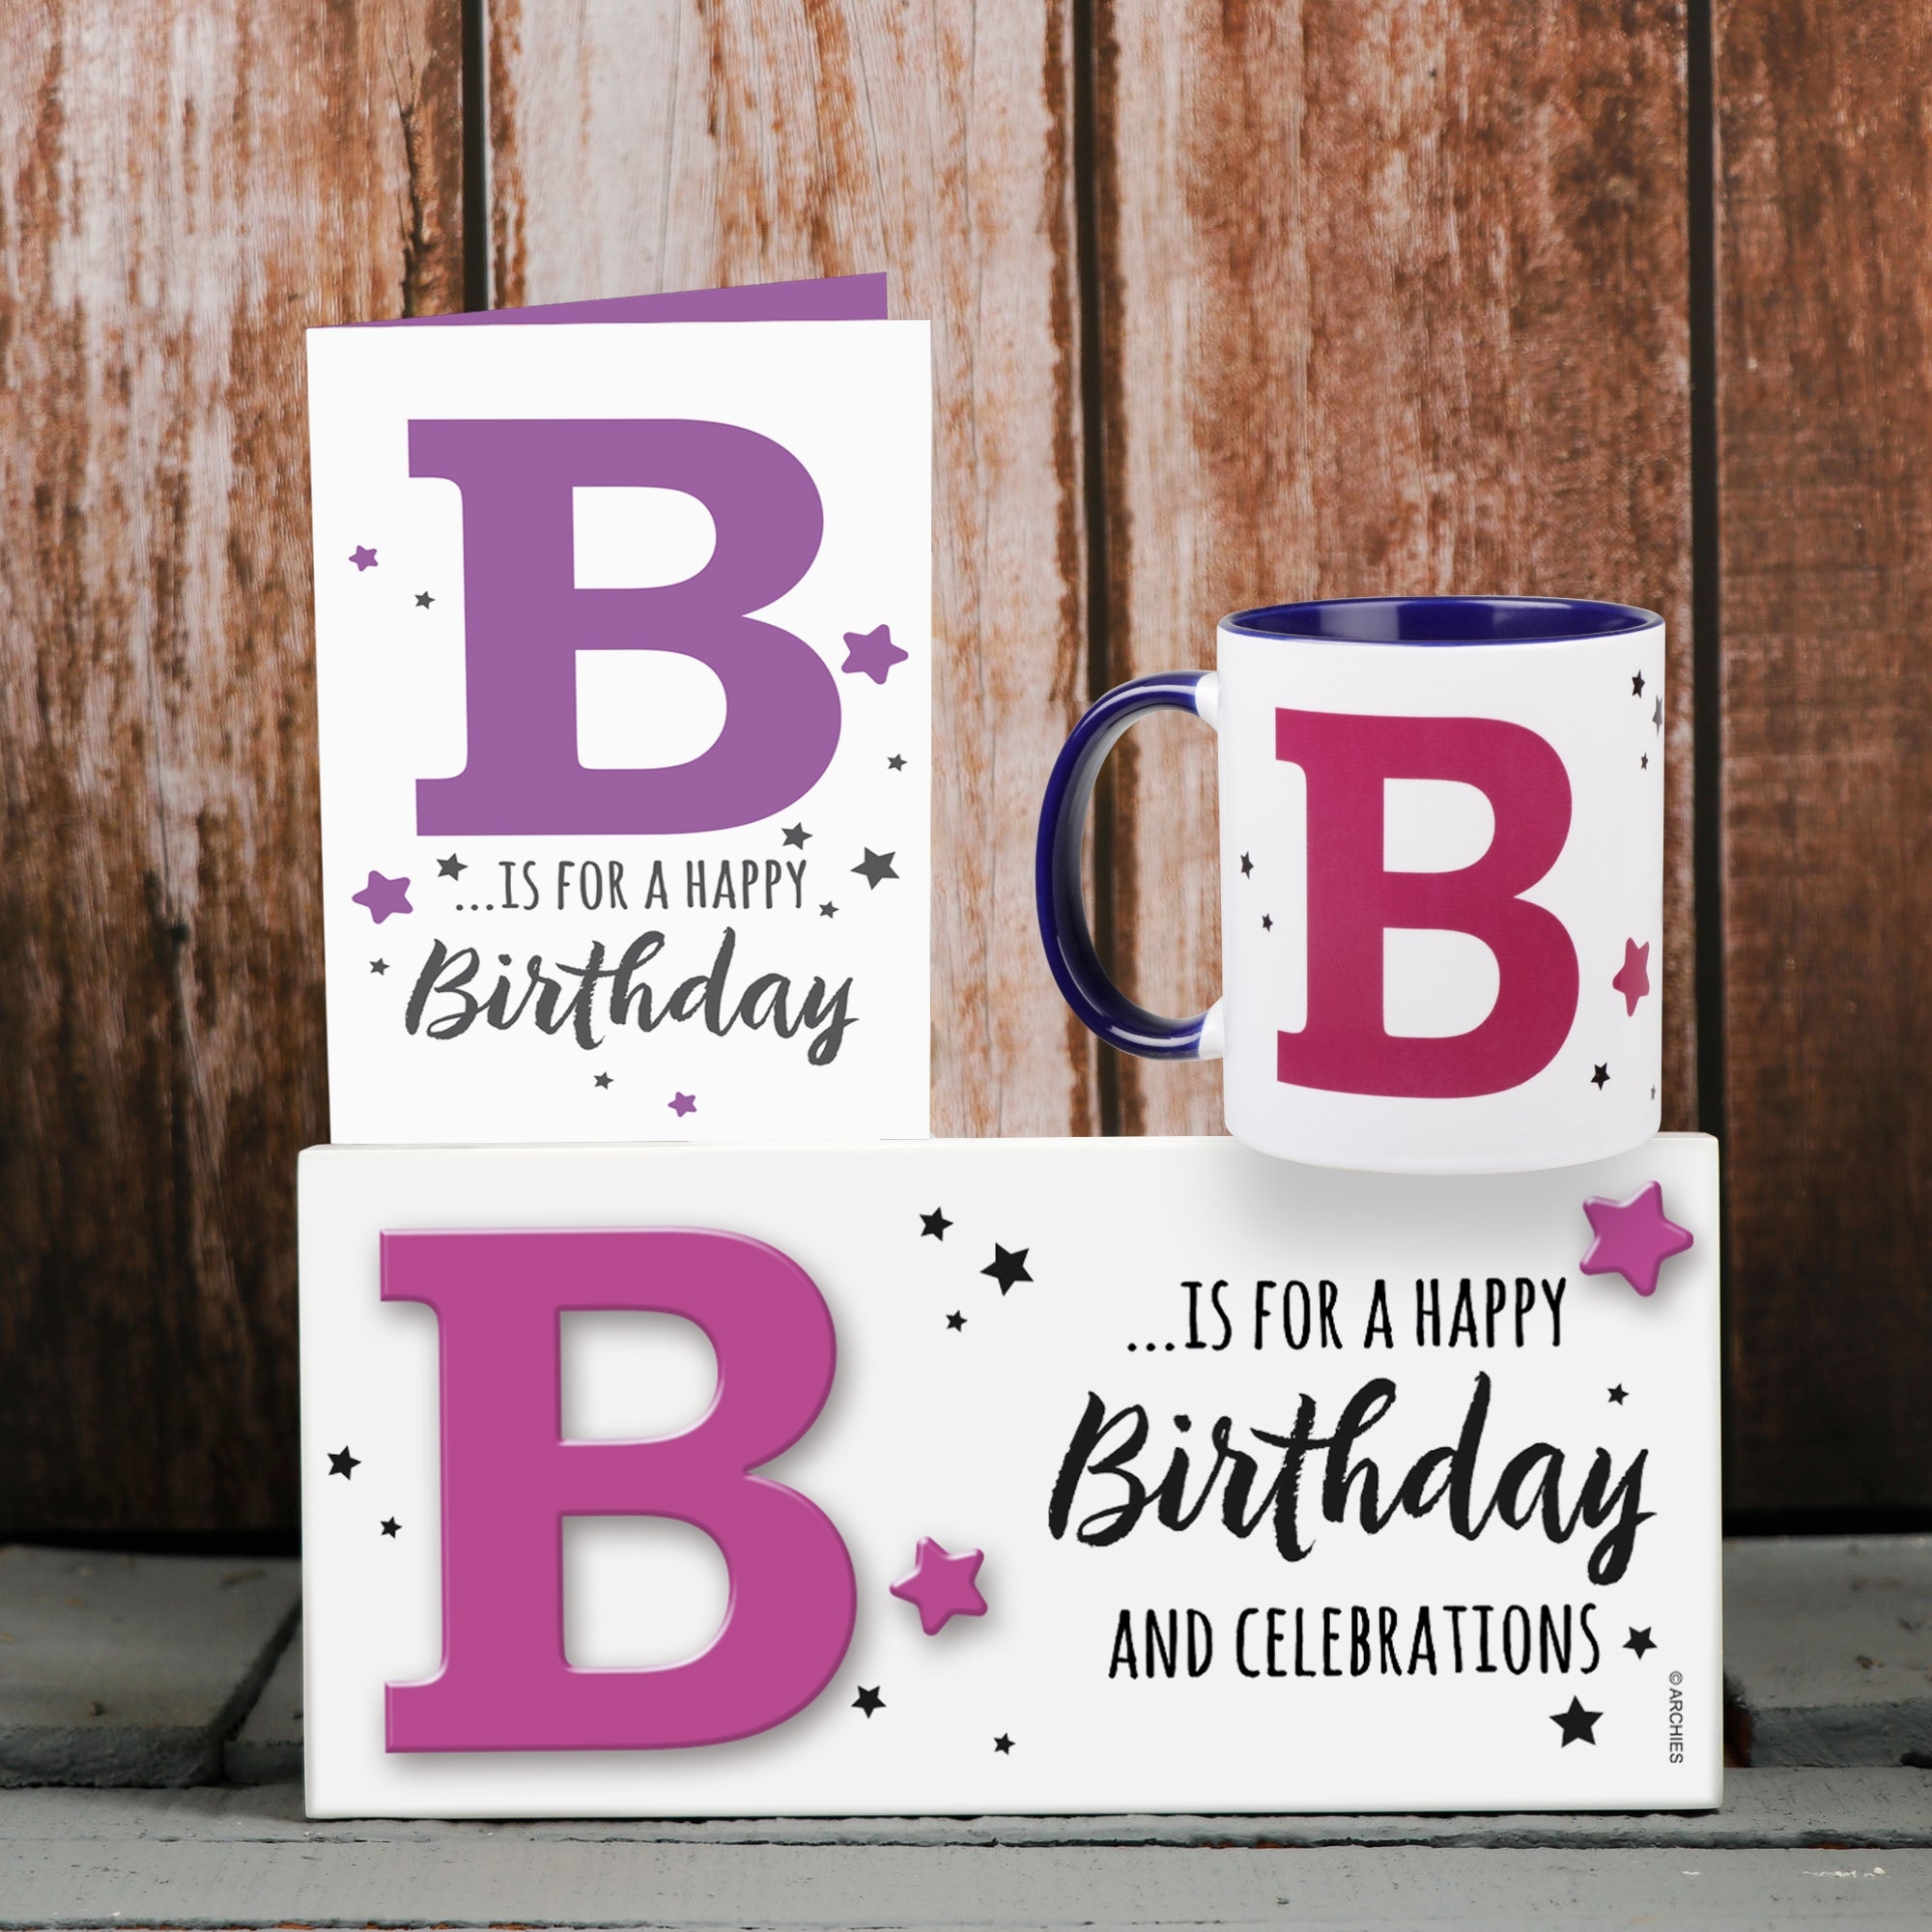 Archies KEEP SAKE Birthday Gift Combo with Ceramic Mug and Elevated Initial Quotation - with a FREE GREETING CARD